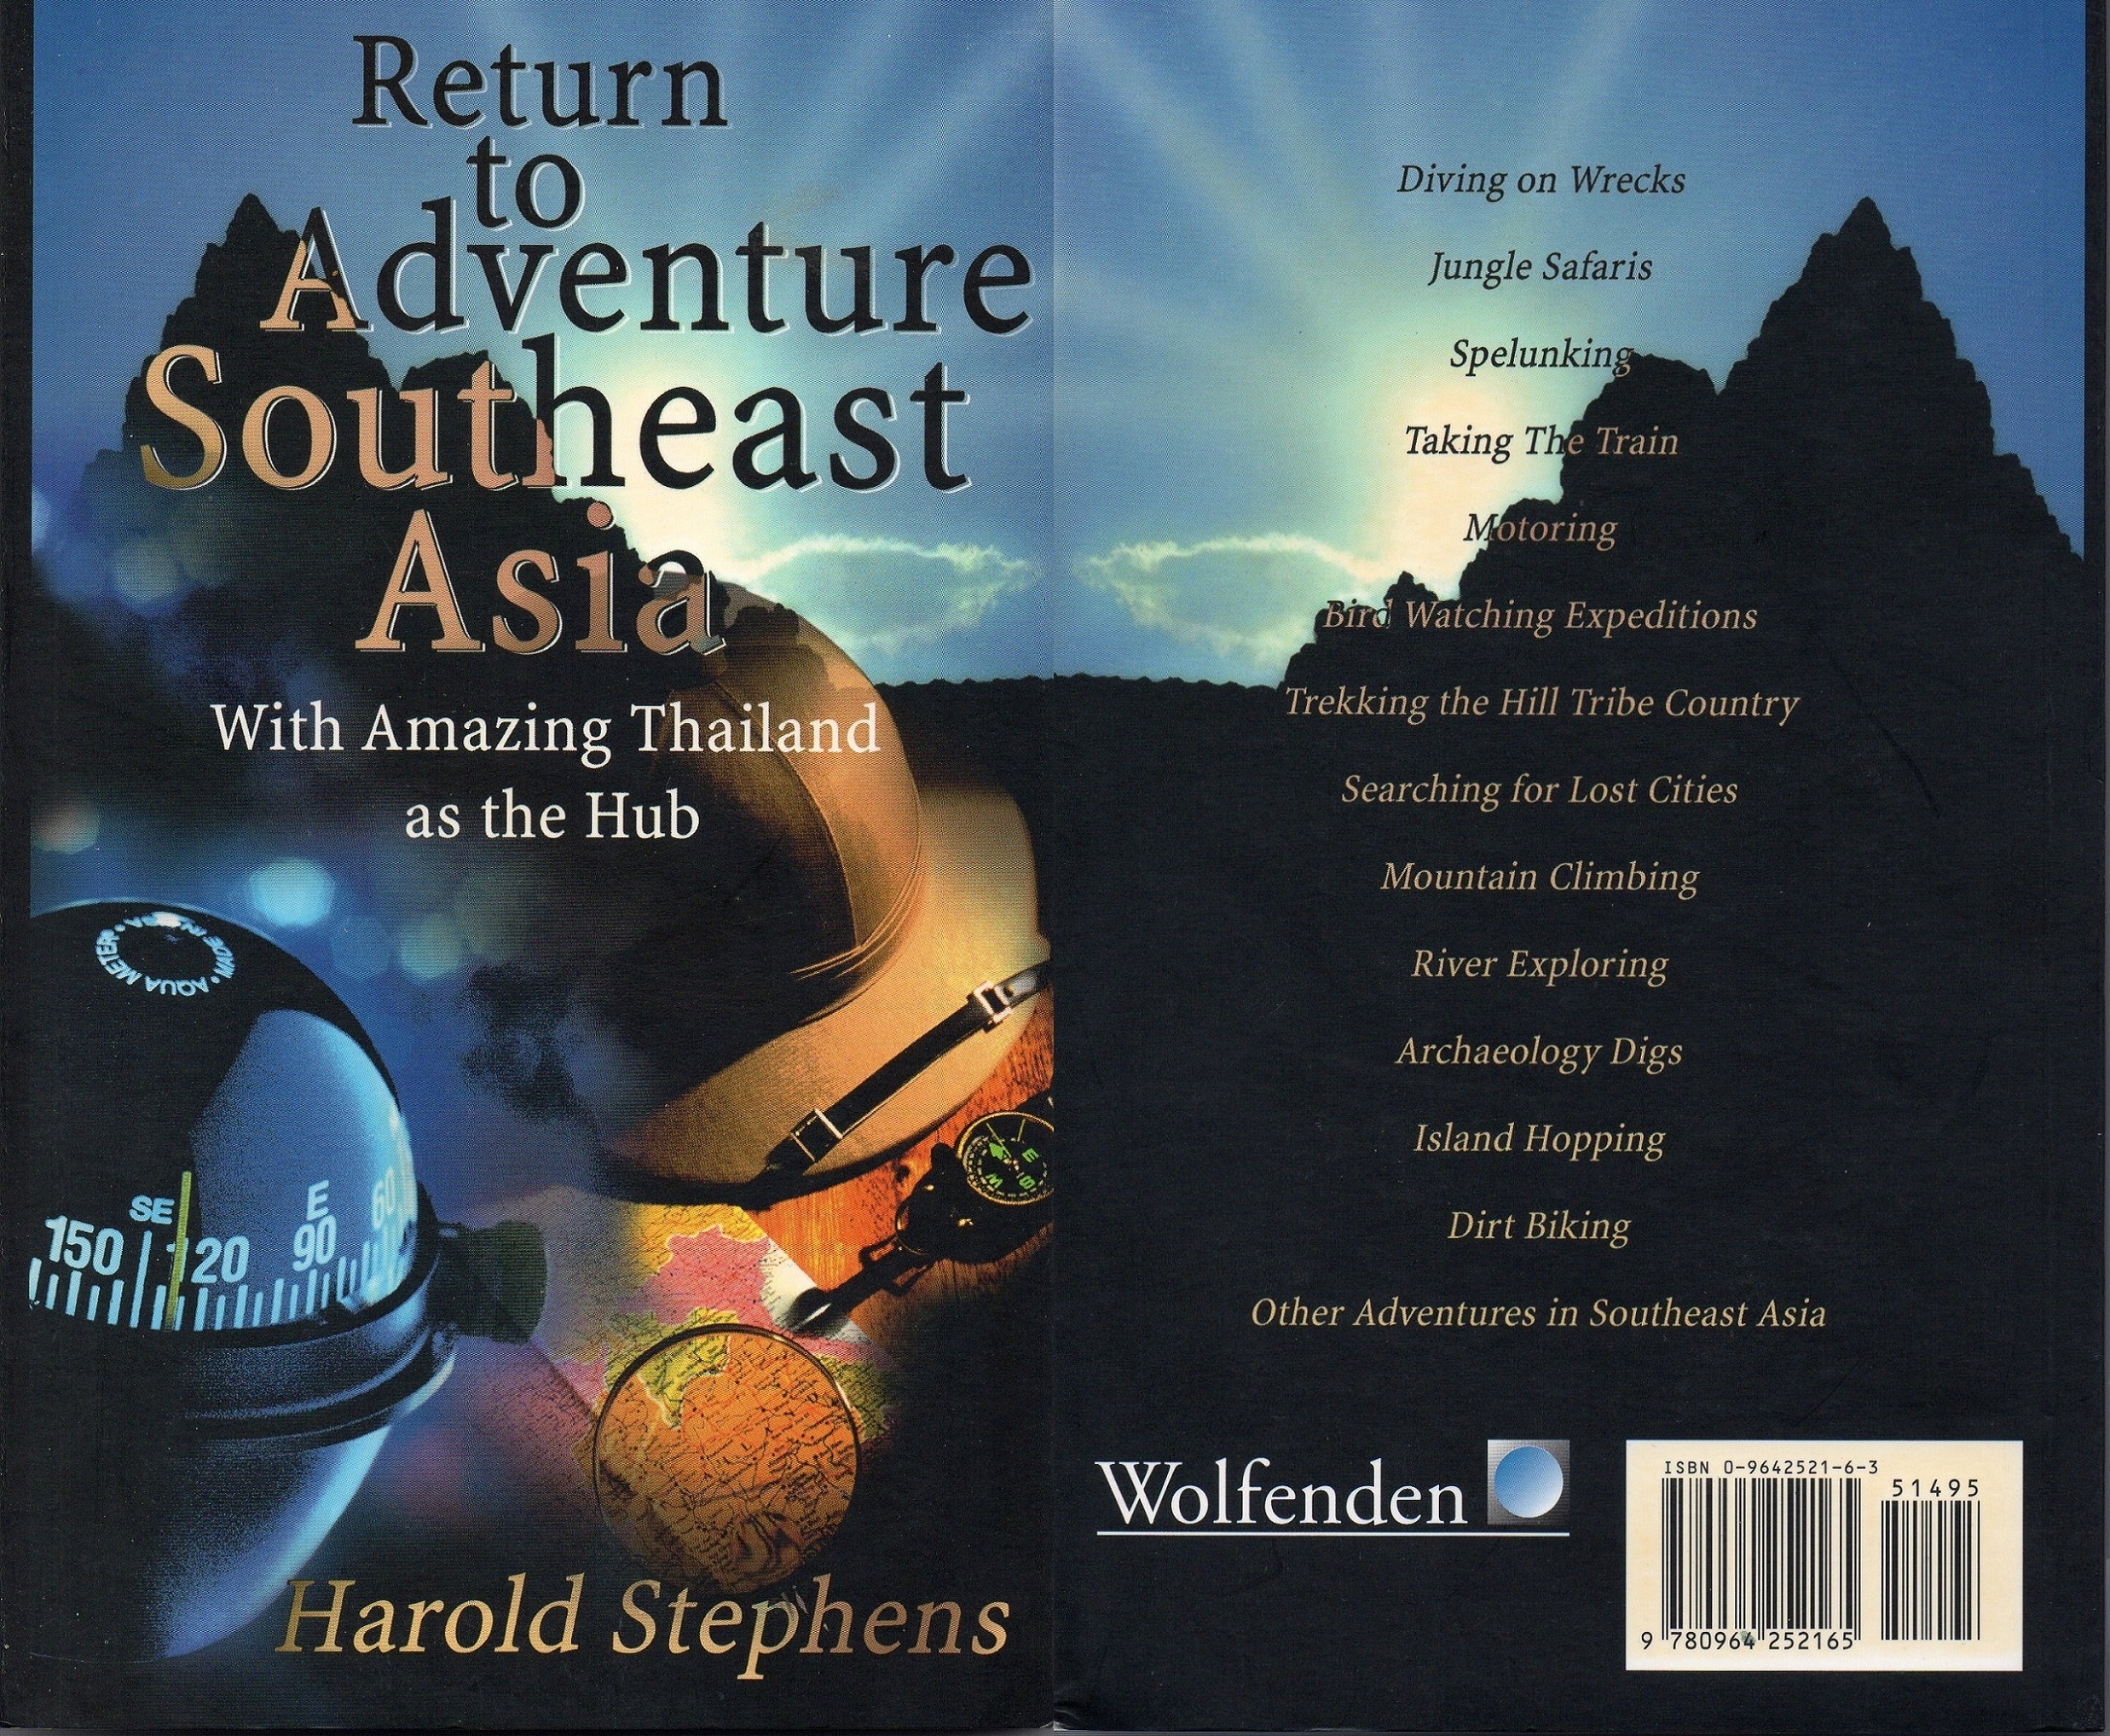 Return to Adventure South East Asia